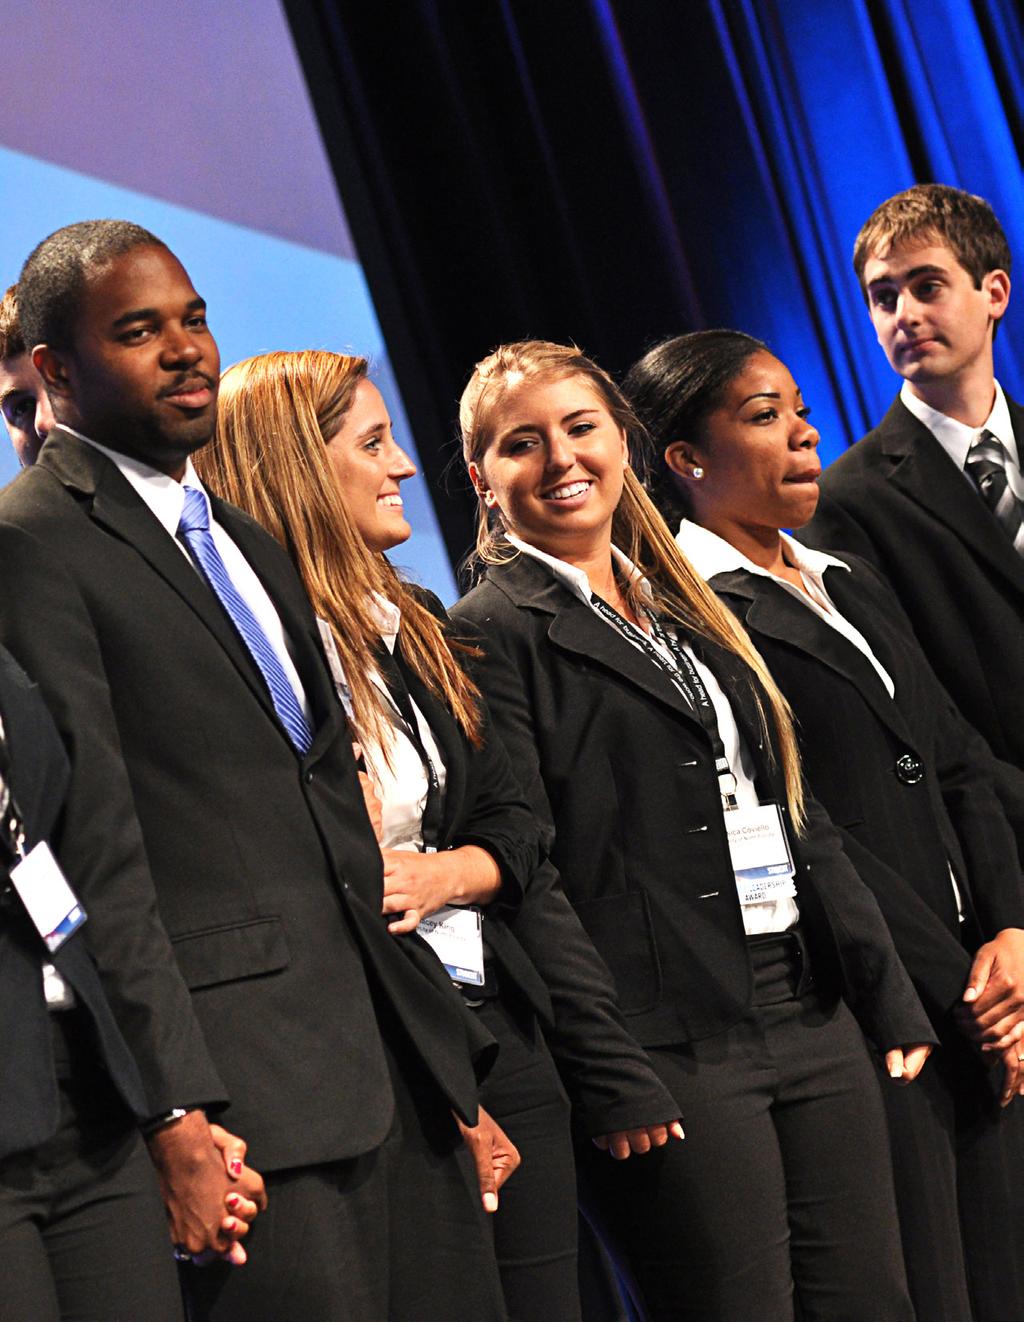 2 Enactus United States Competitions, Awards